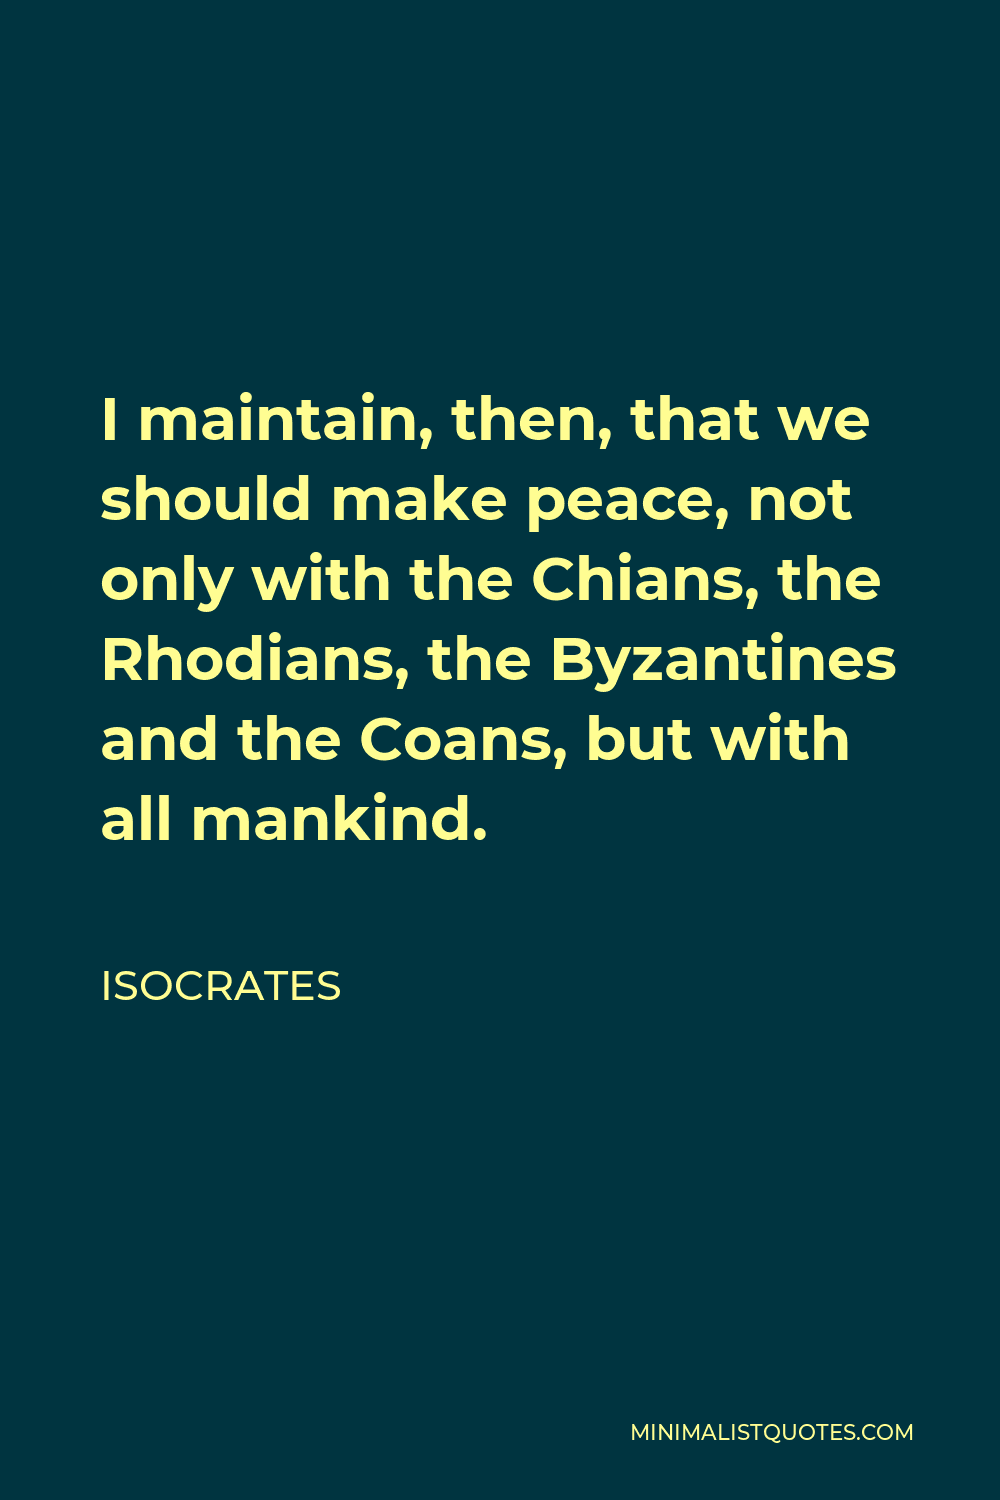 Isocrates Quote - I maintain, then, that we should make peace, not only with the Chians, the Rhodians, the Byzantines and the Coans, but with all mankind.